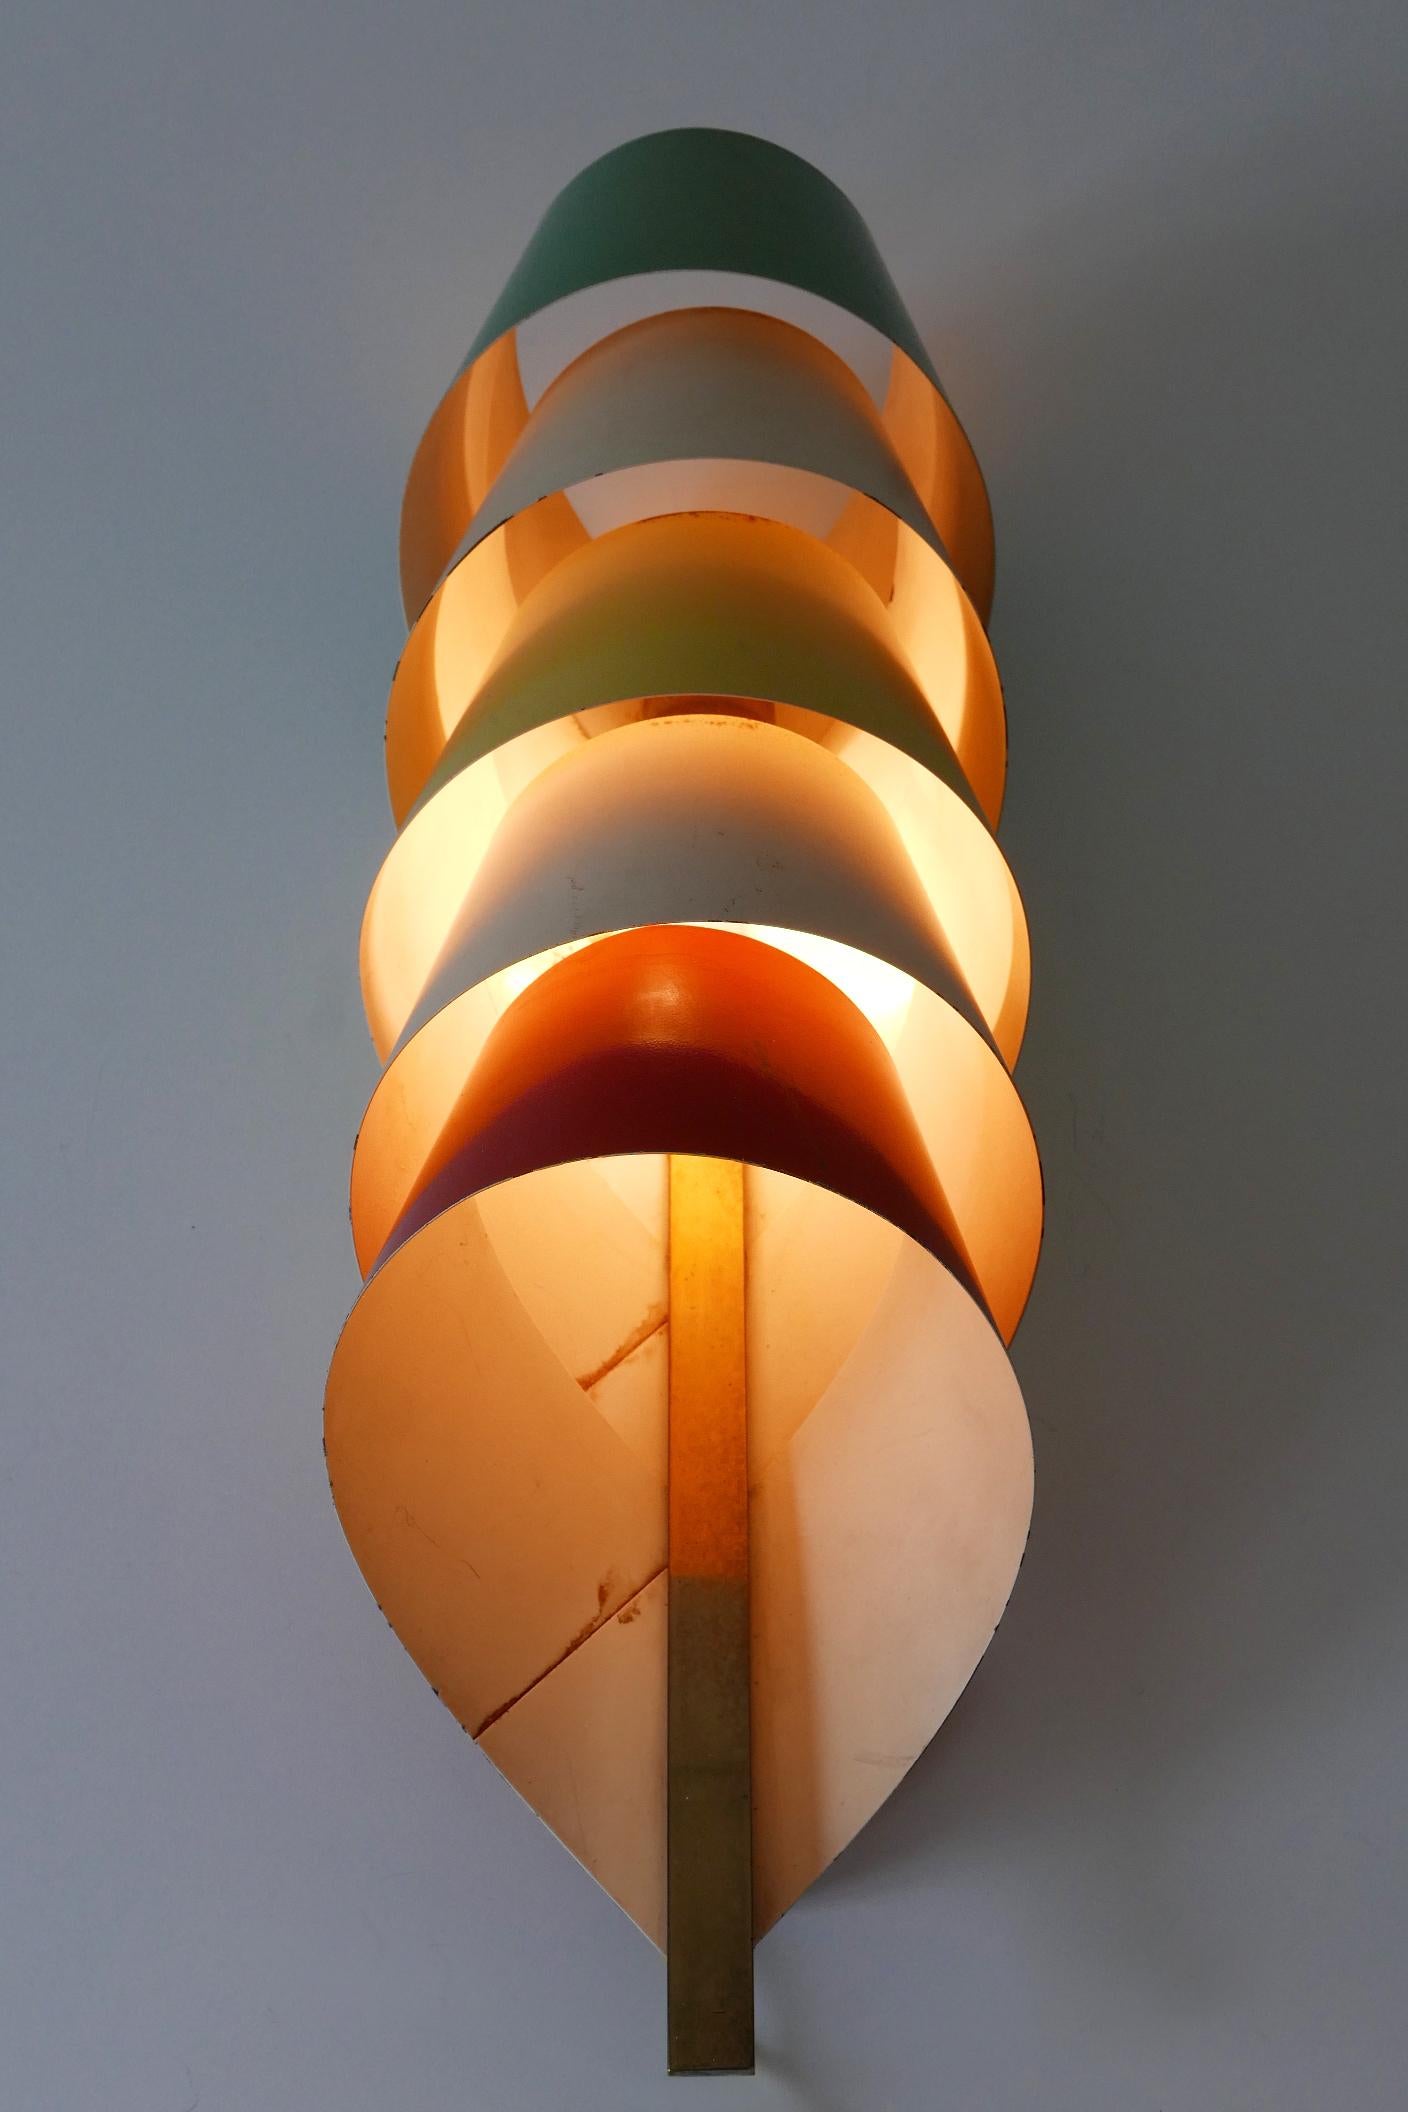 Rare & Decorative Mid-Century Modern Sconce or Wall Lamp Scandinavia 1950s For Sale 4